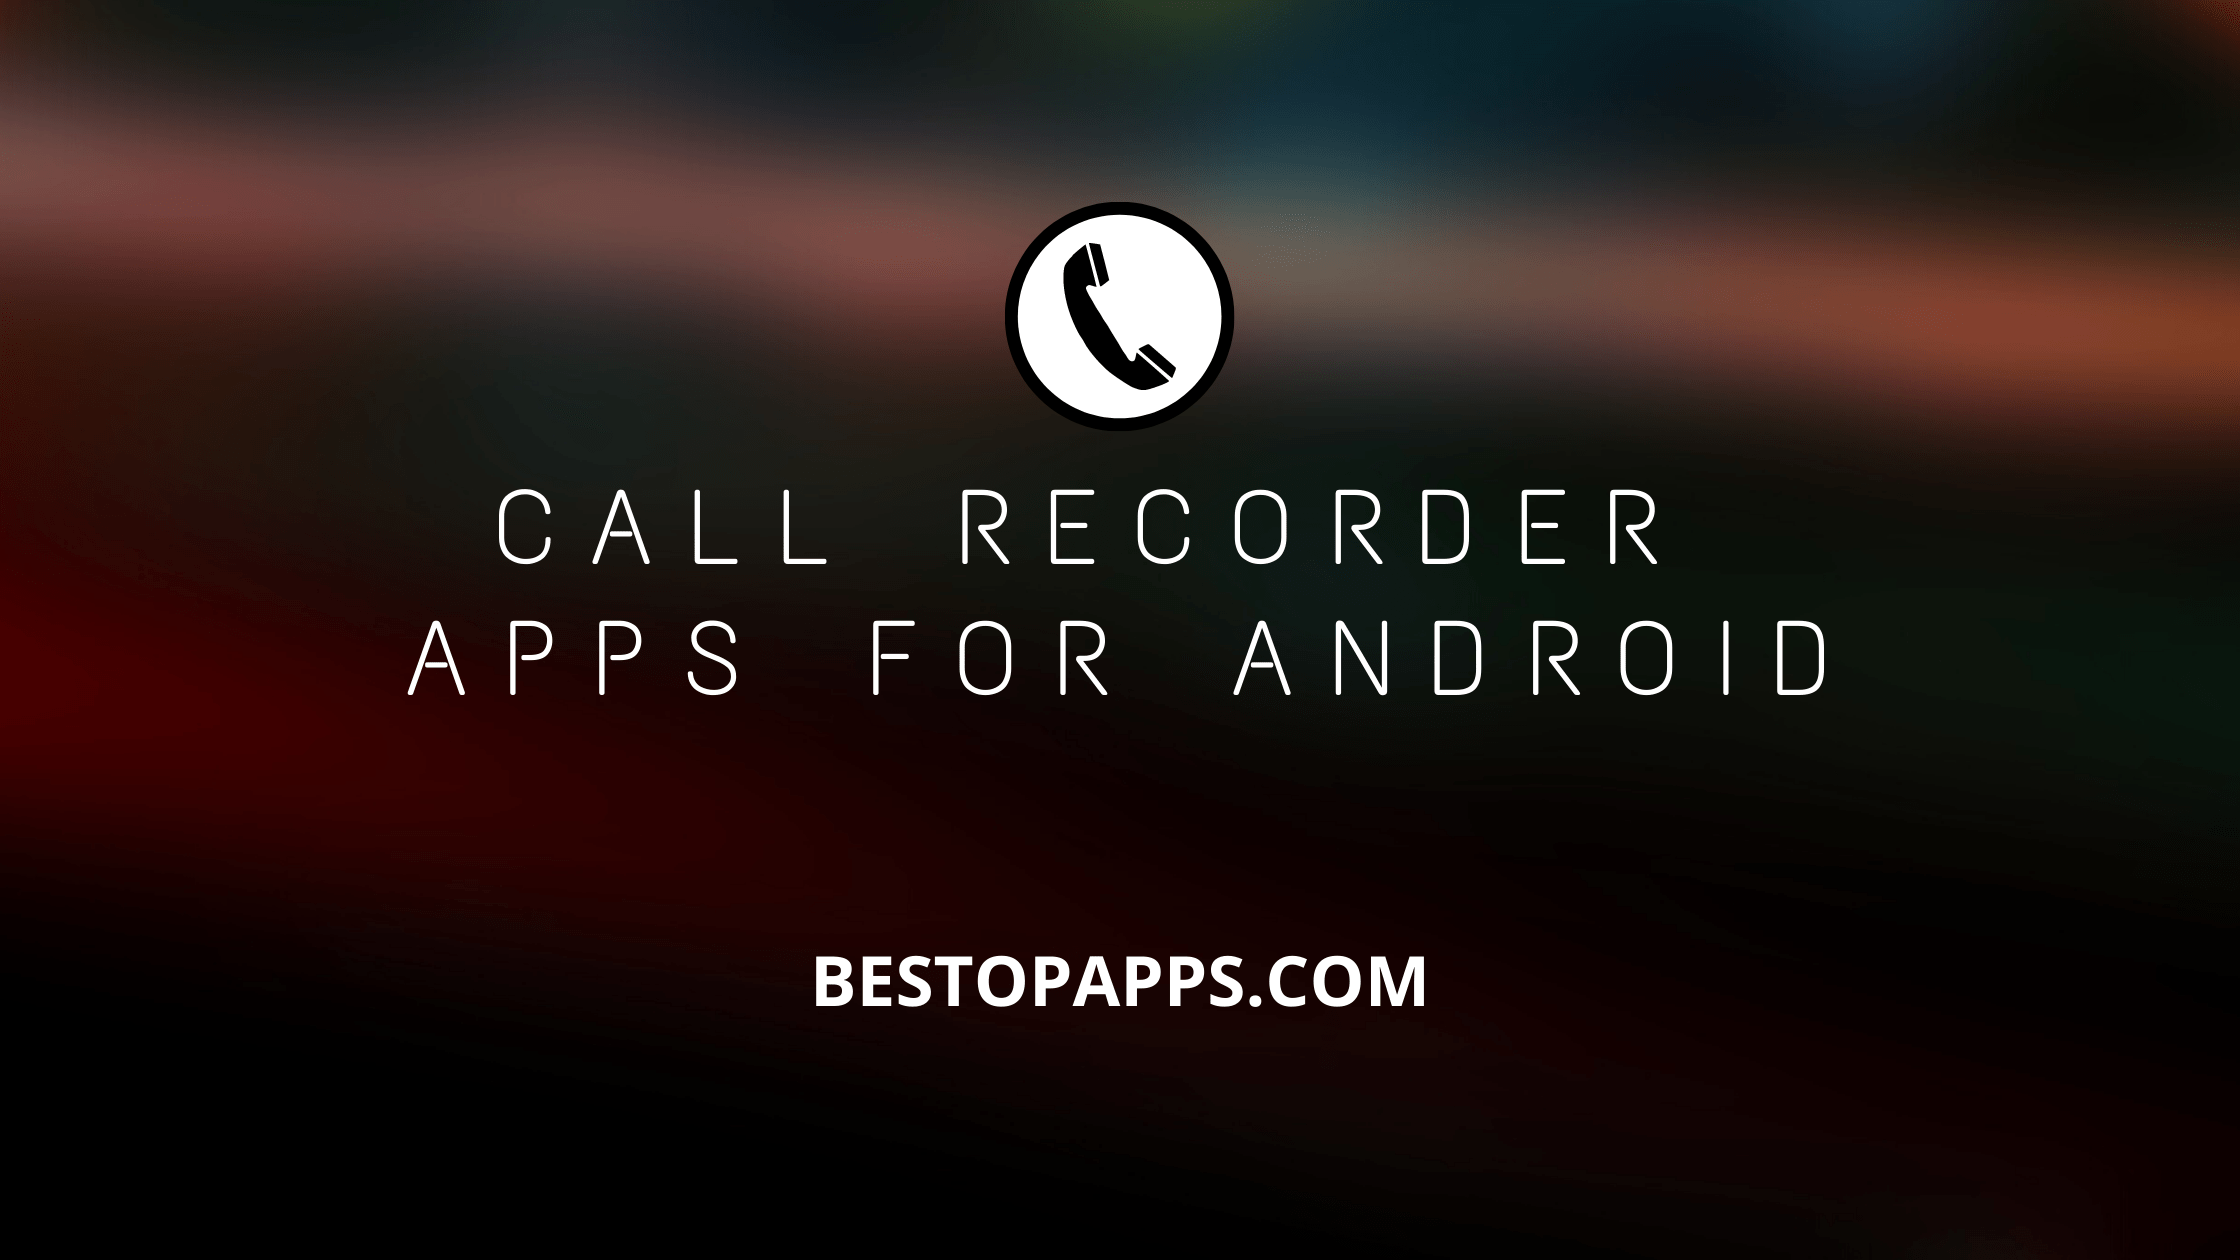 CALL RECORDER APPS FOR ANDROID